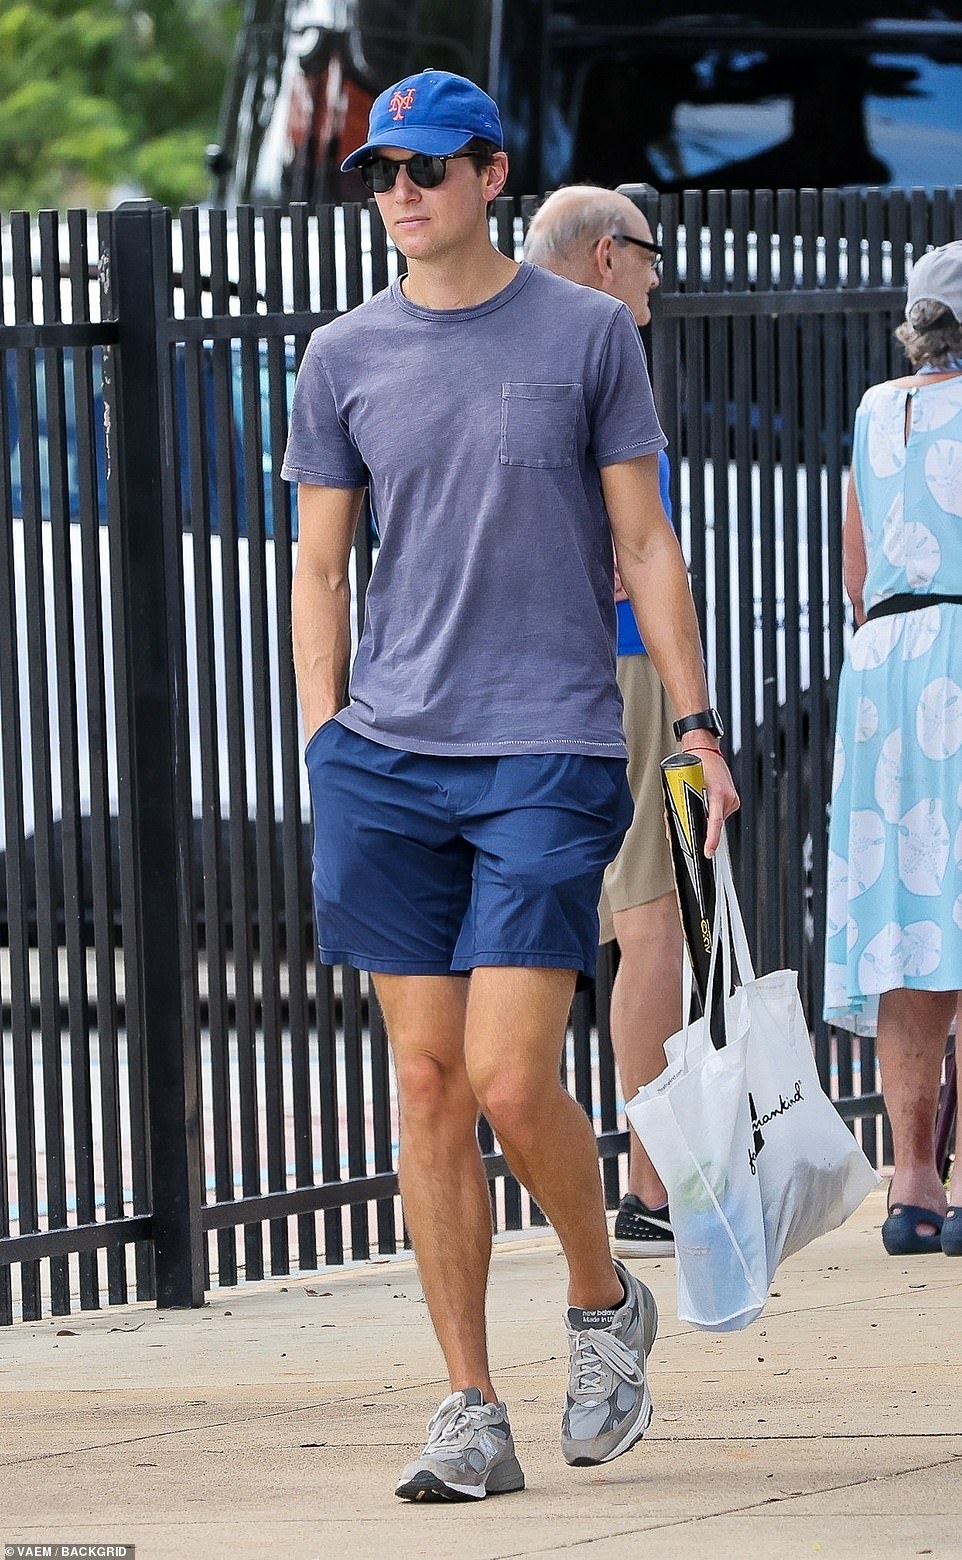 Jared was dressed casually in a faded purple pocket tee, navy shorts, and a pair of gray New Balance sneakers